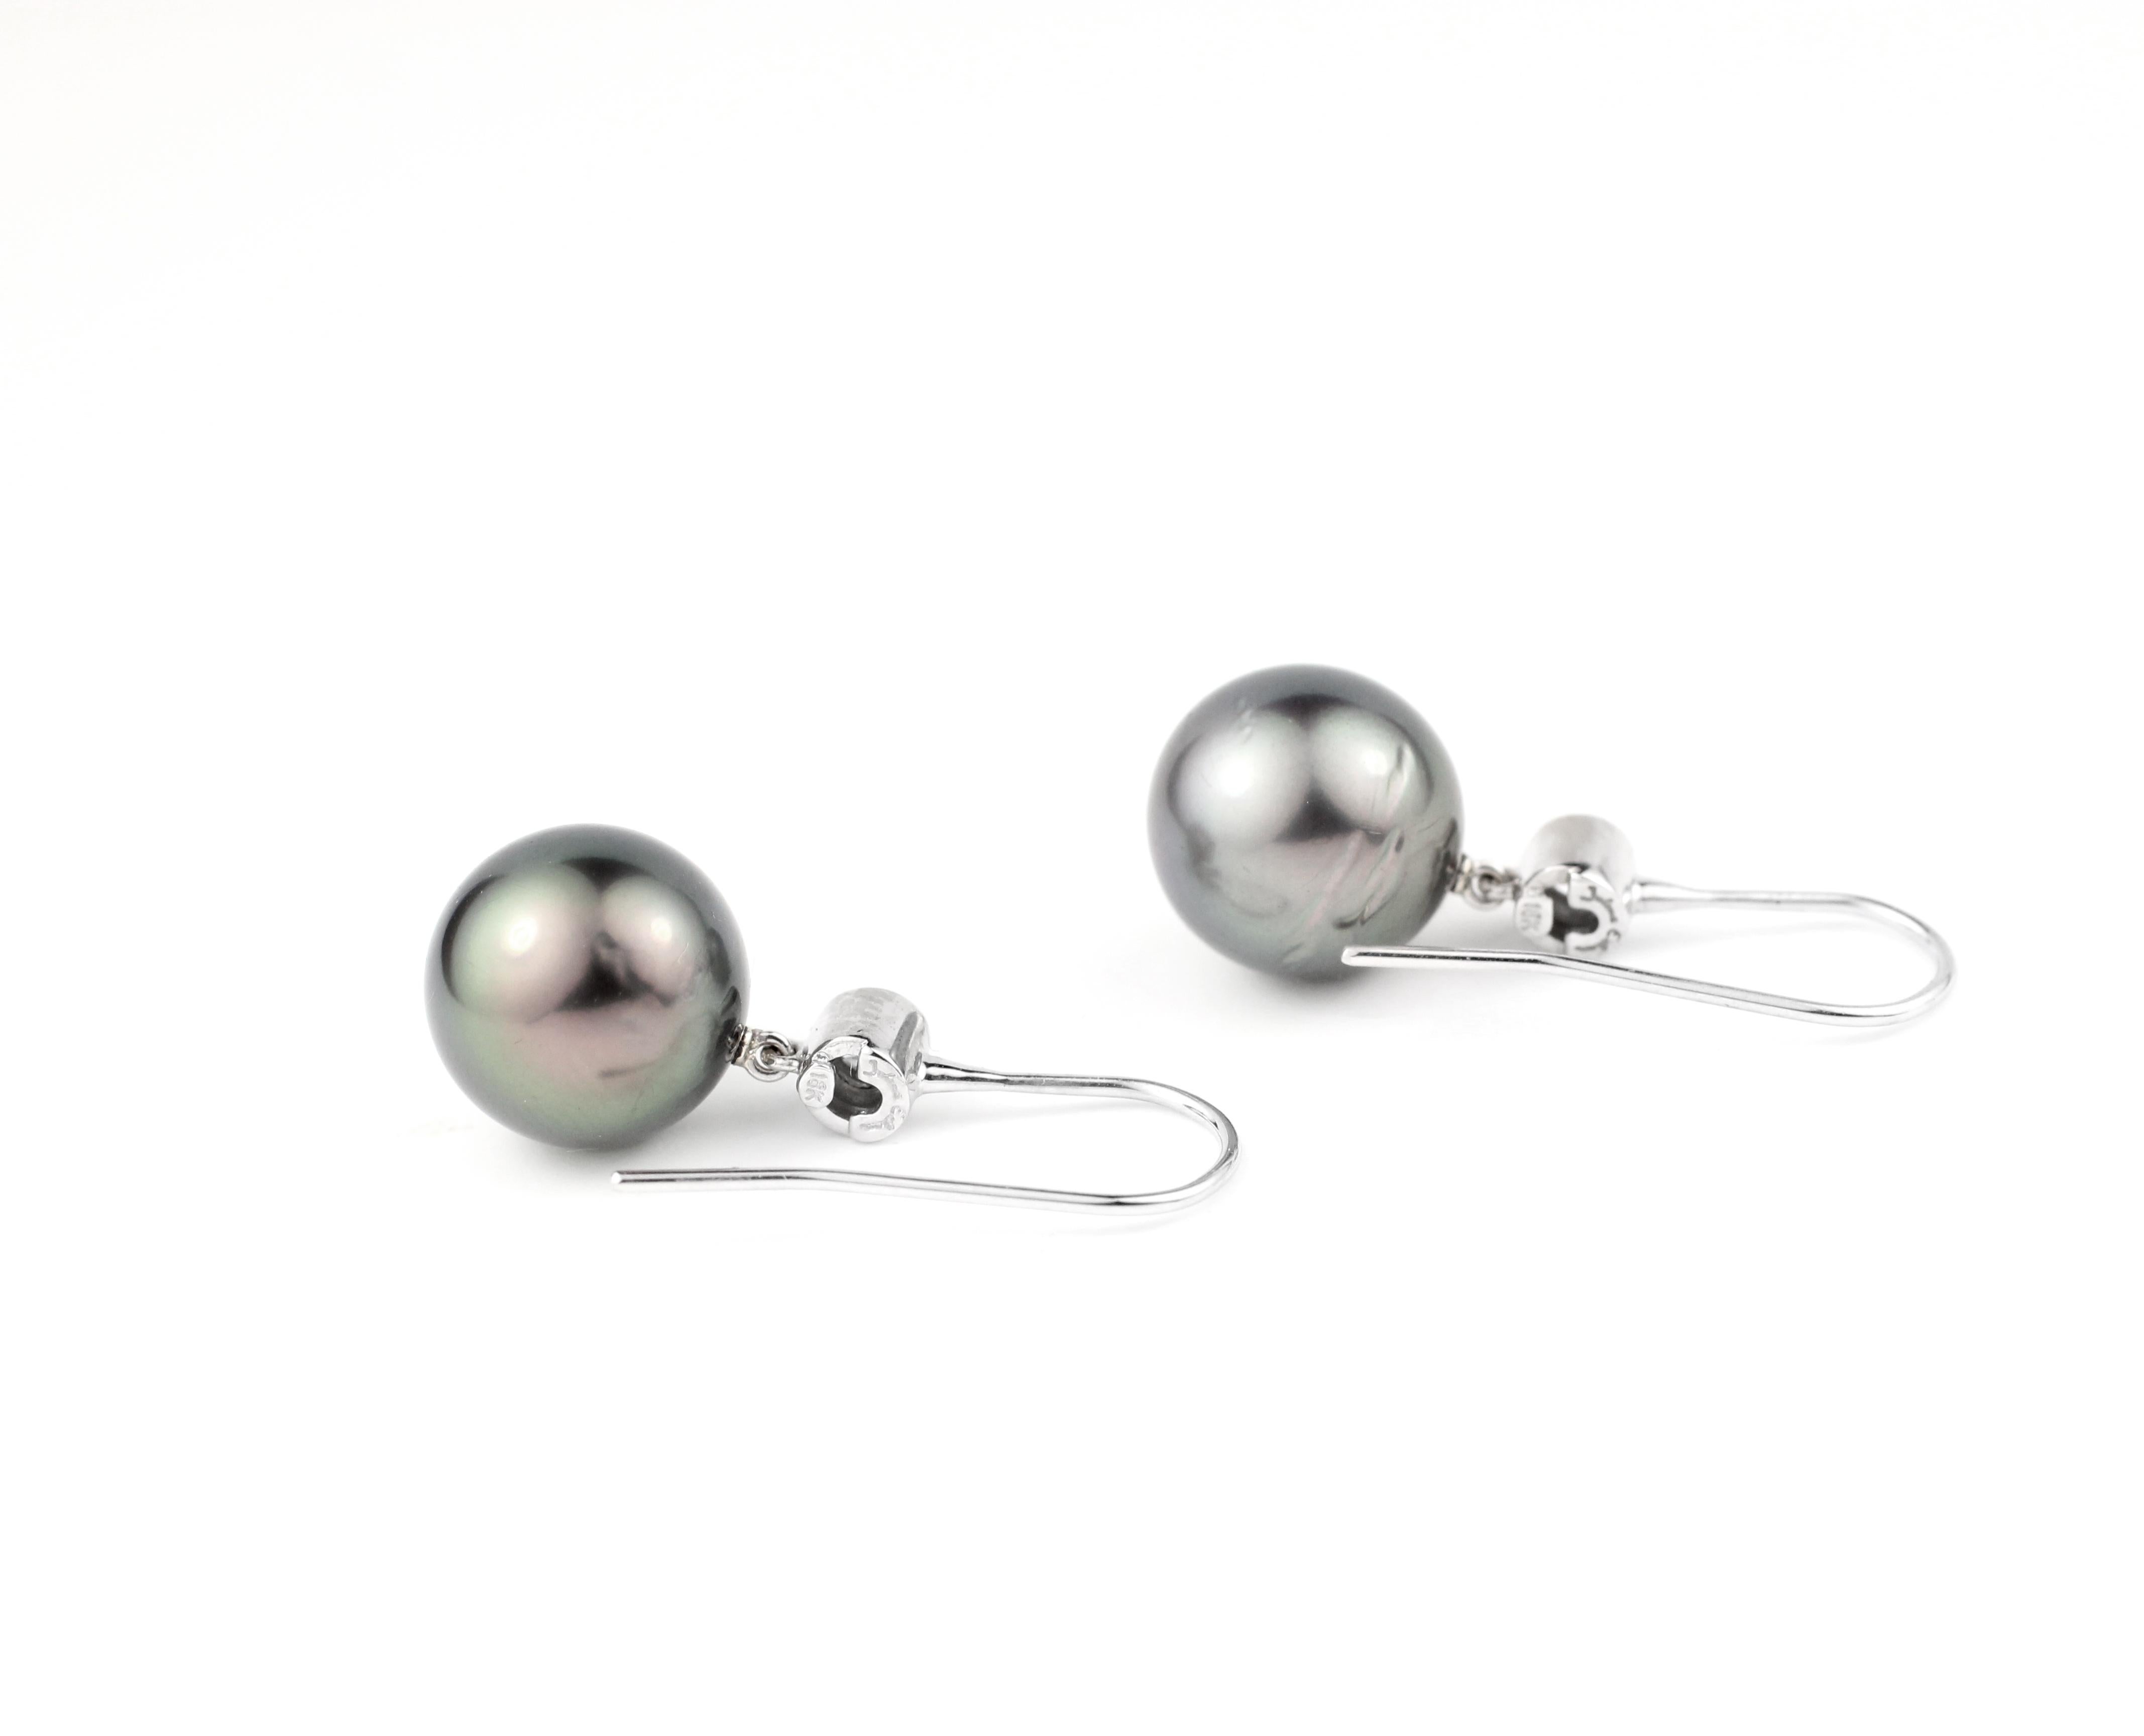 Containing two 11 mm fine Tahitian Pearls in 18 Kt White Gold hanger-style hook settings with two Brilliant Diamonds (.19 Cts.), just for a little sparkle.

Designed and made in-house by Julius Cohen New York.  